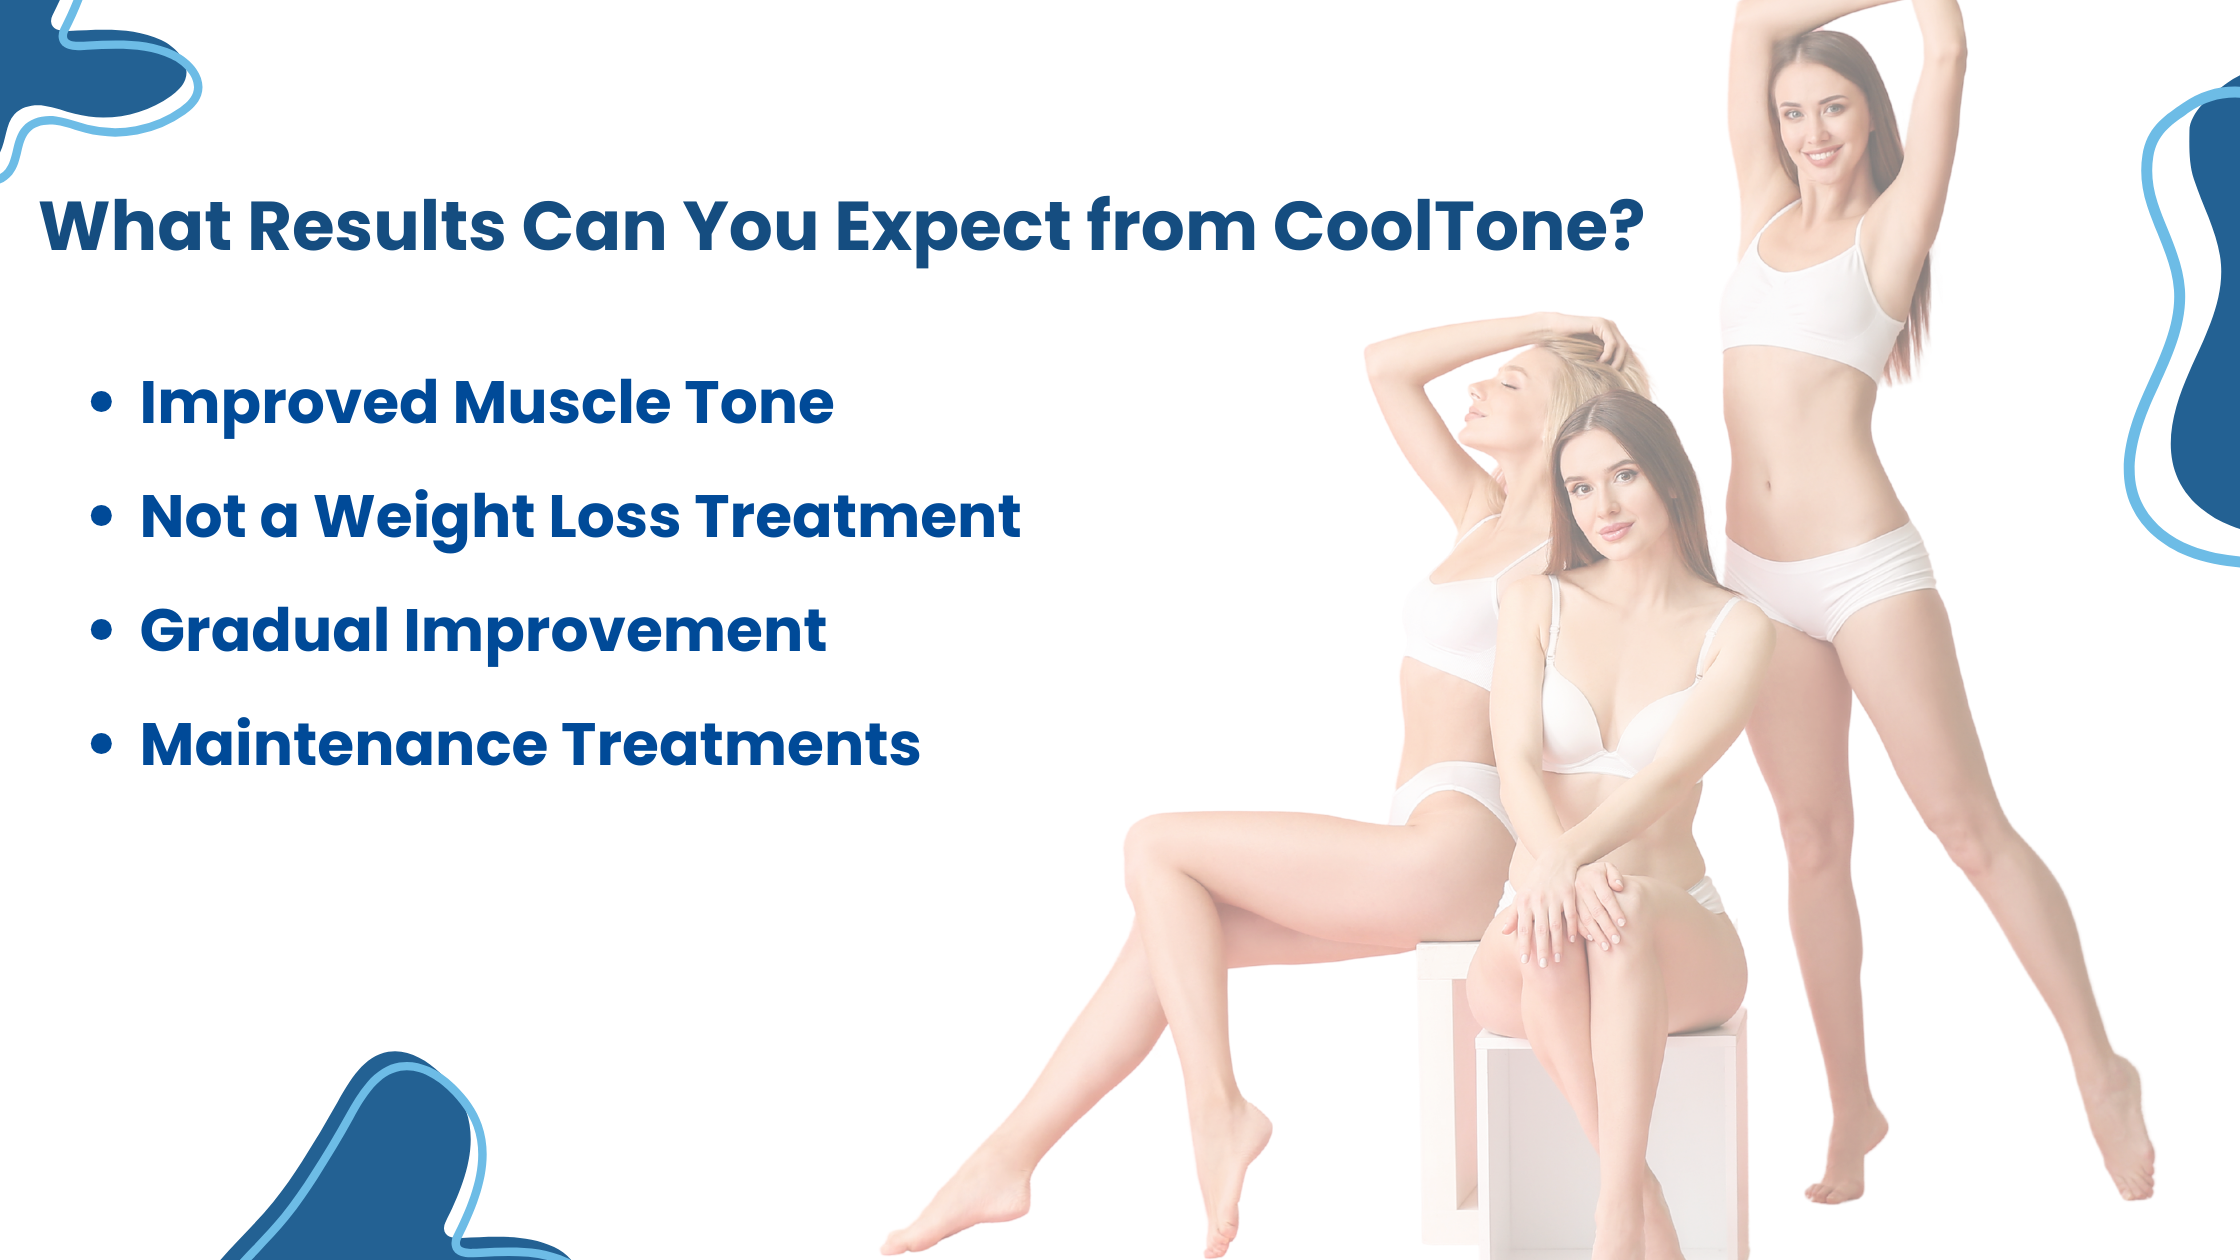 What Results Can You Expect from CoolTone